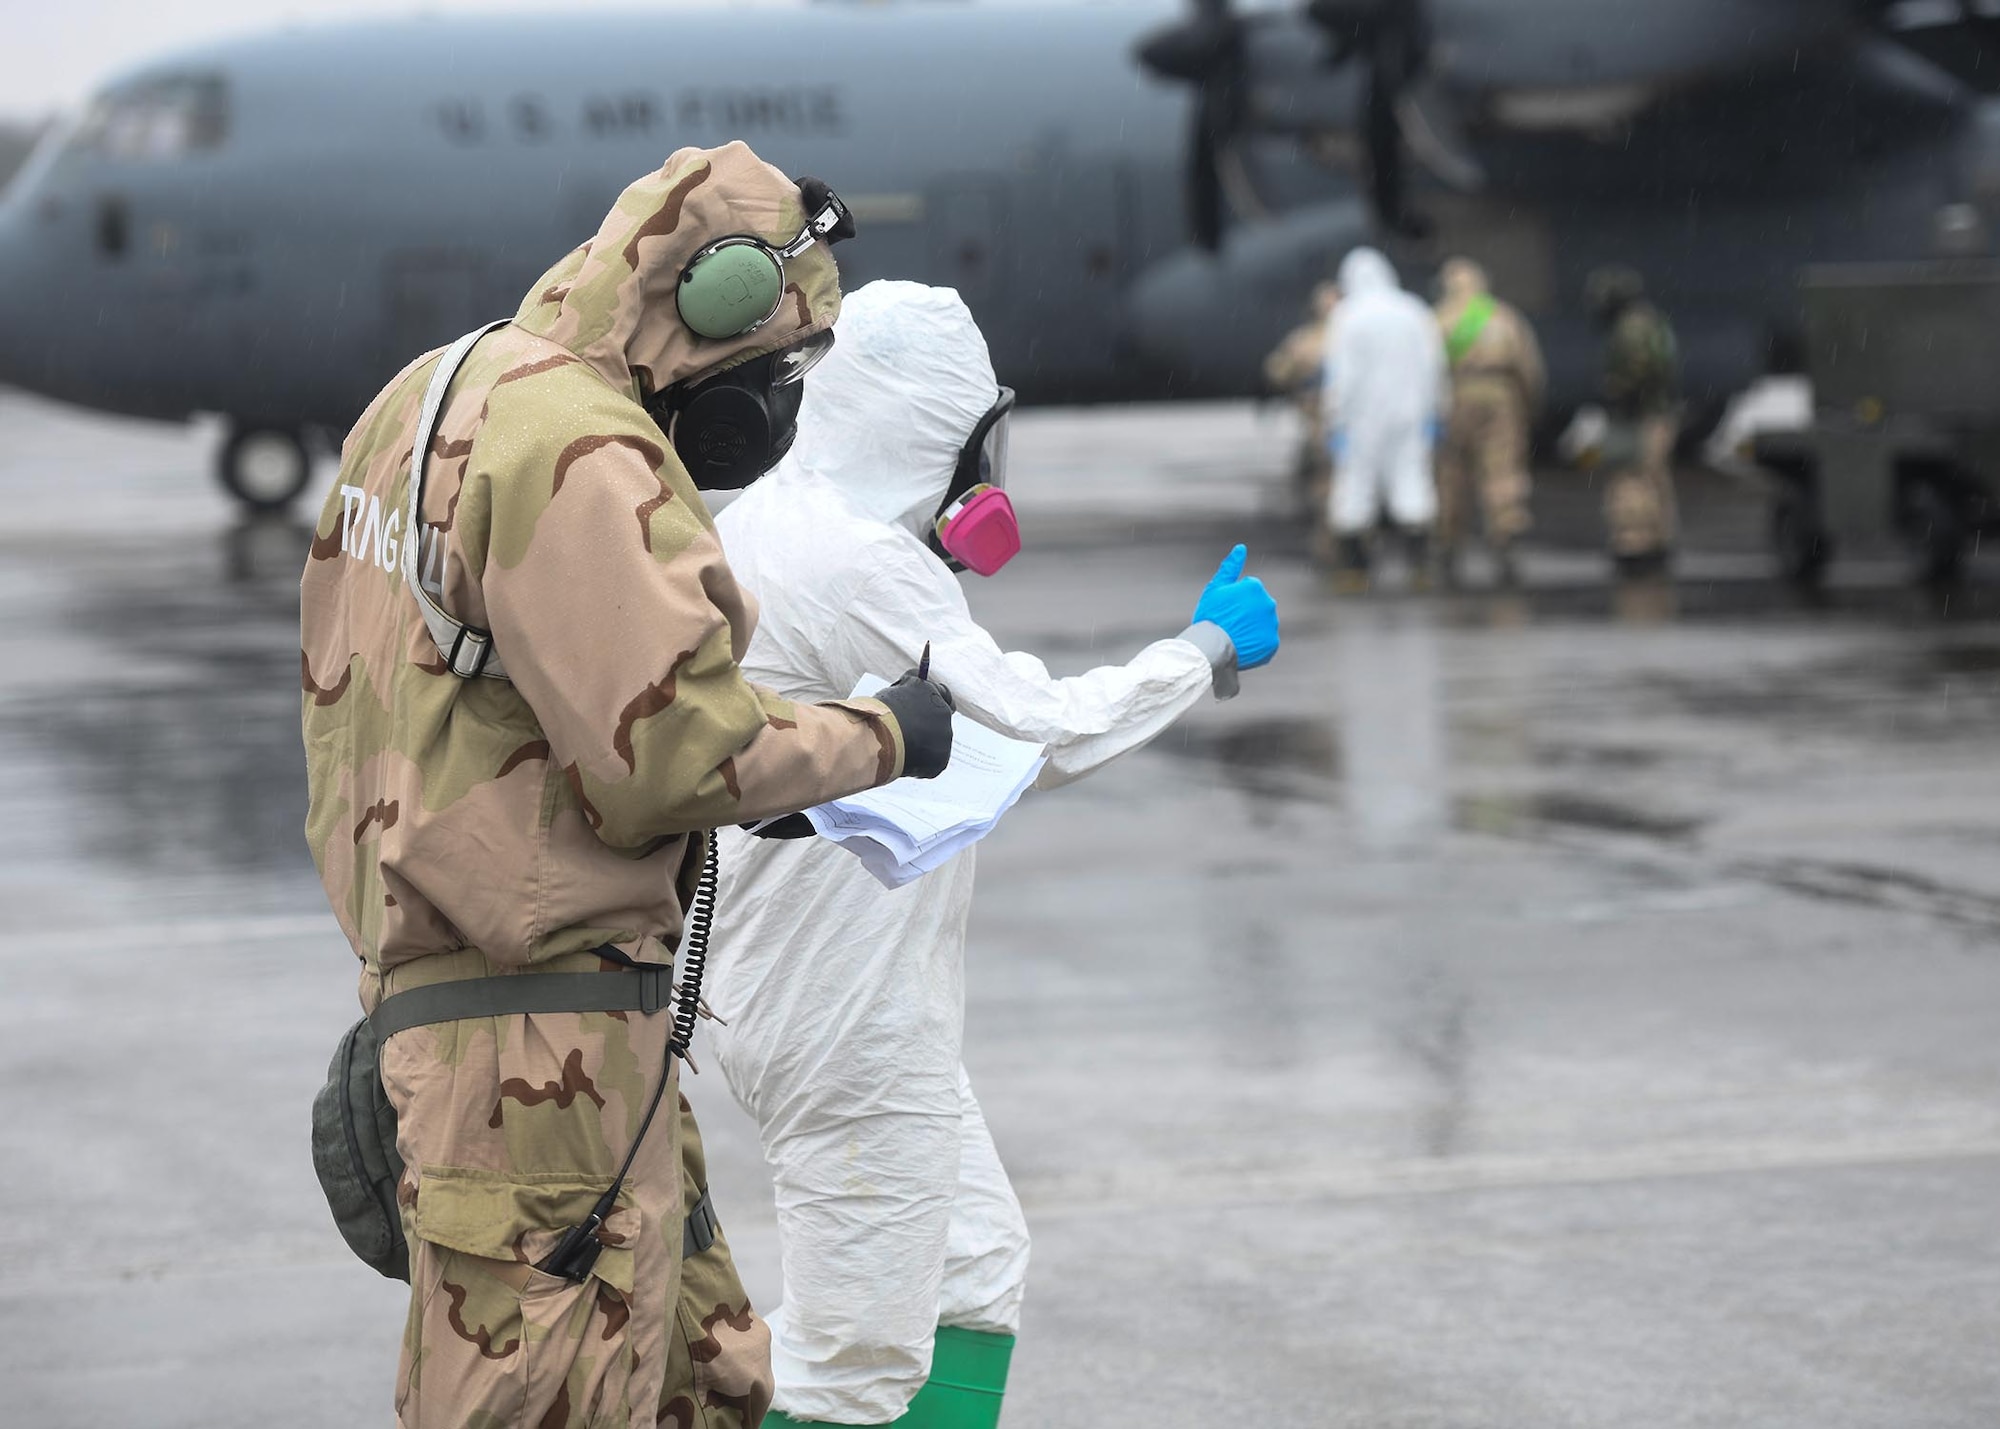 Two Airmen walk towards a large grey plane in protective clothing.